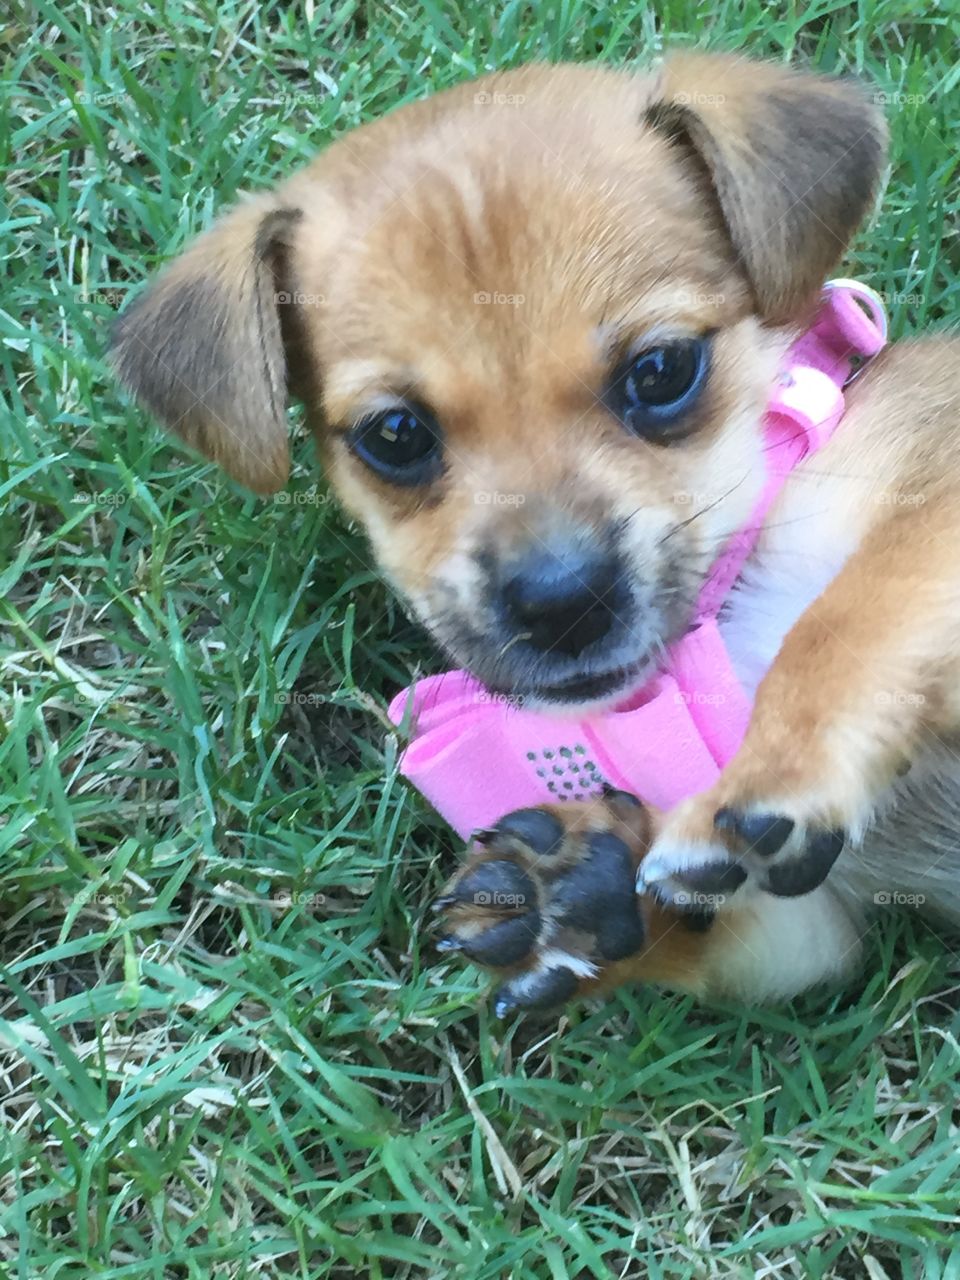 6 Week Old Curious Brown Puppy Dog On Grass Looking As If She’s Giving You A. High-Five haha